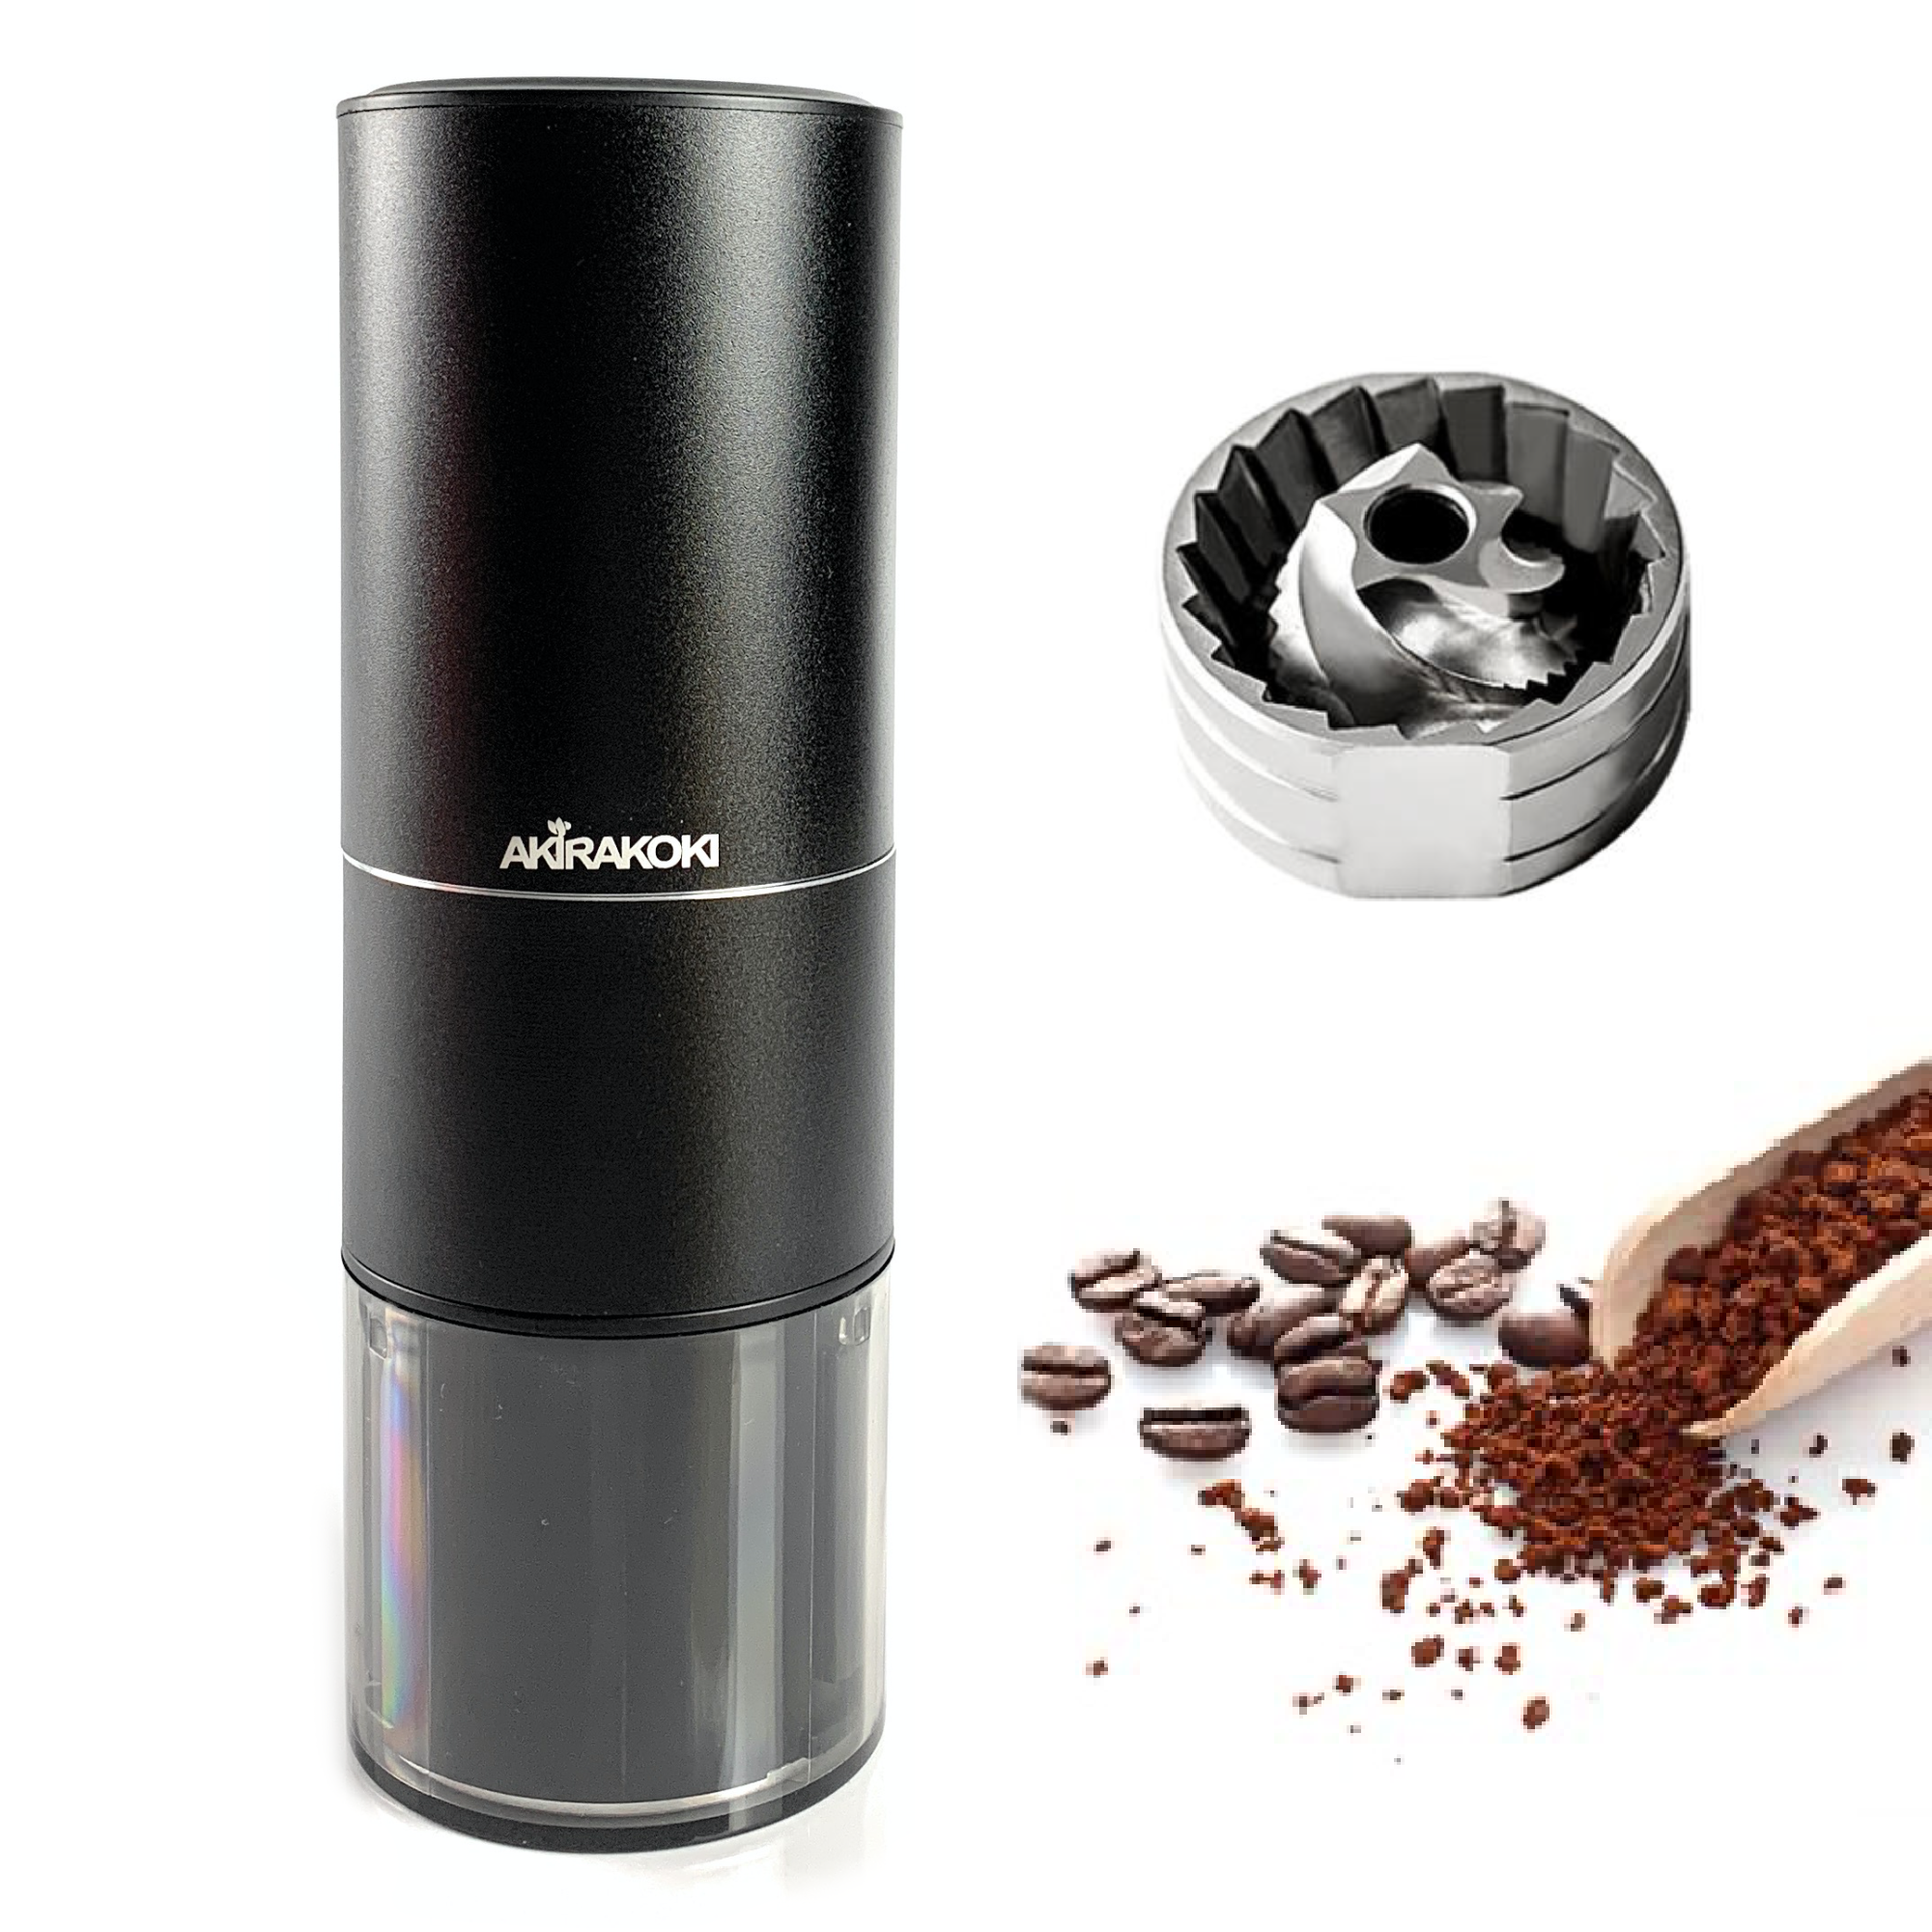 Electric Coffee Grinder New Upgrade Mini Portable Coffee Bean Grinder USB  Charge Stainless Steel Espresso Spice Mill Grinders